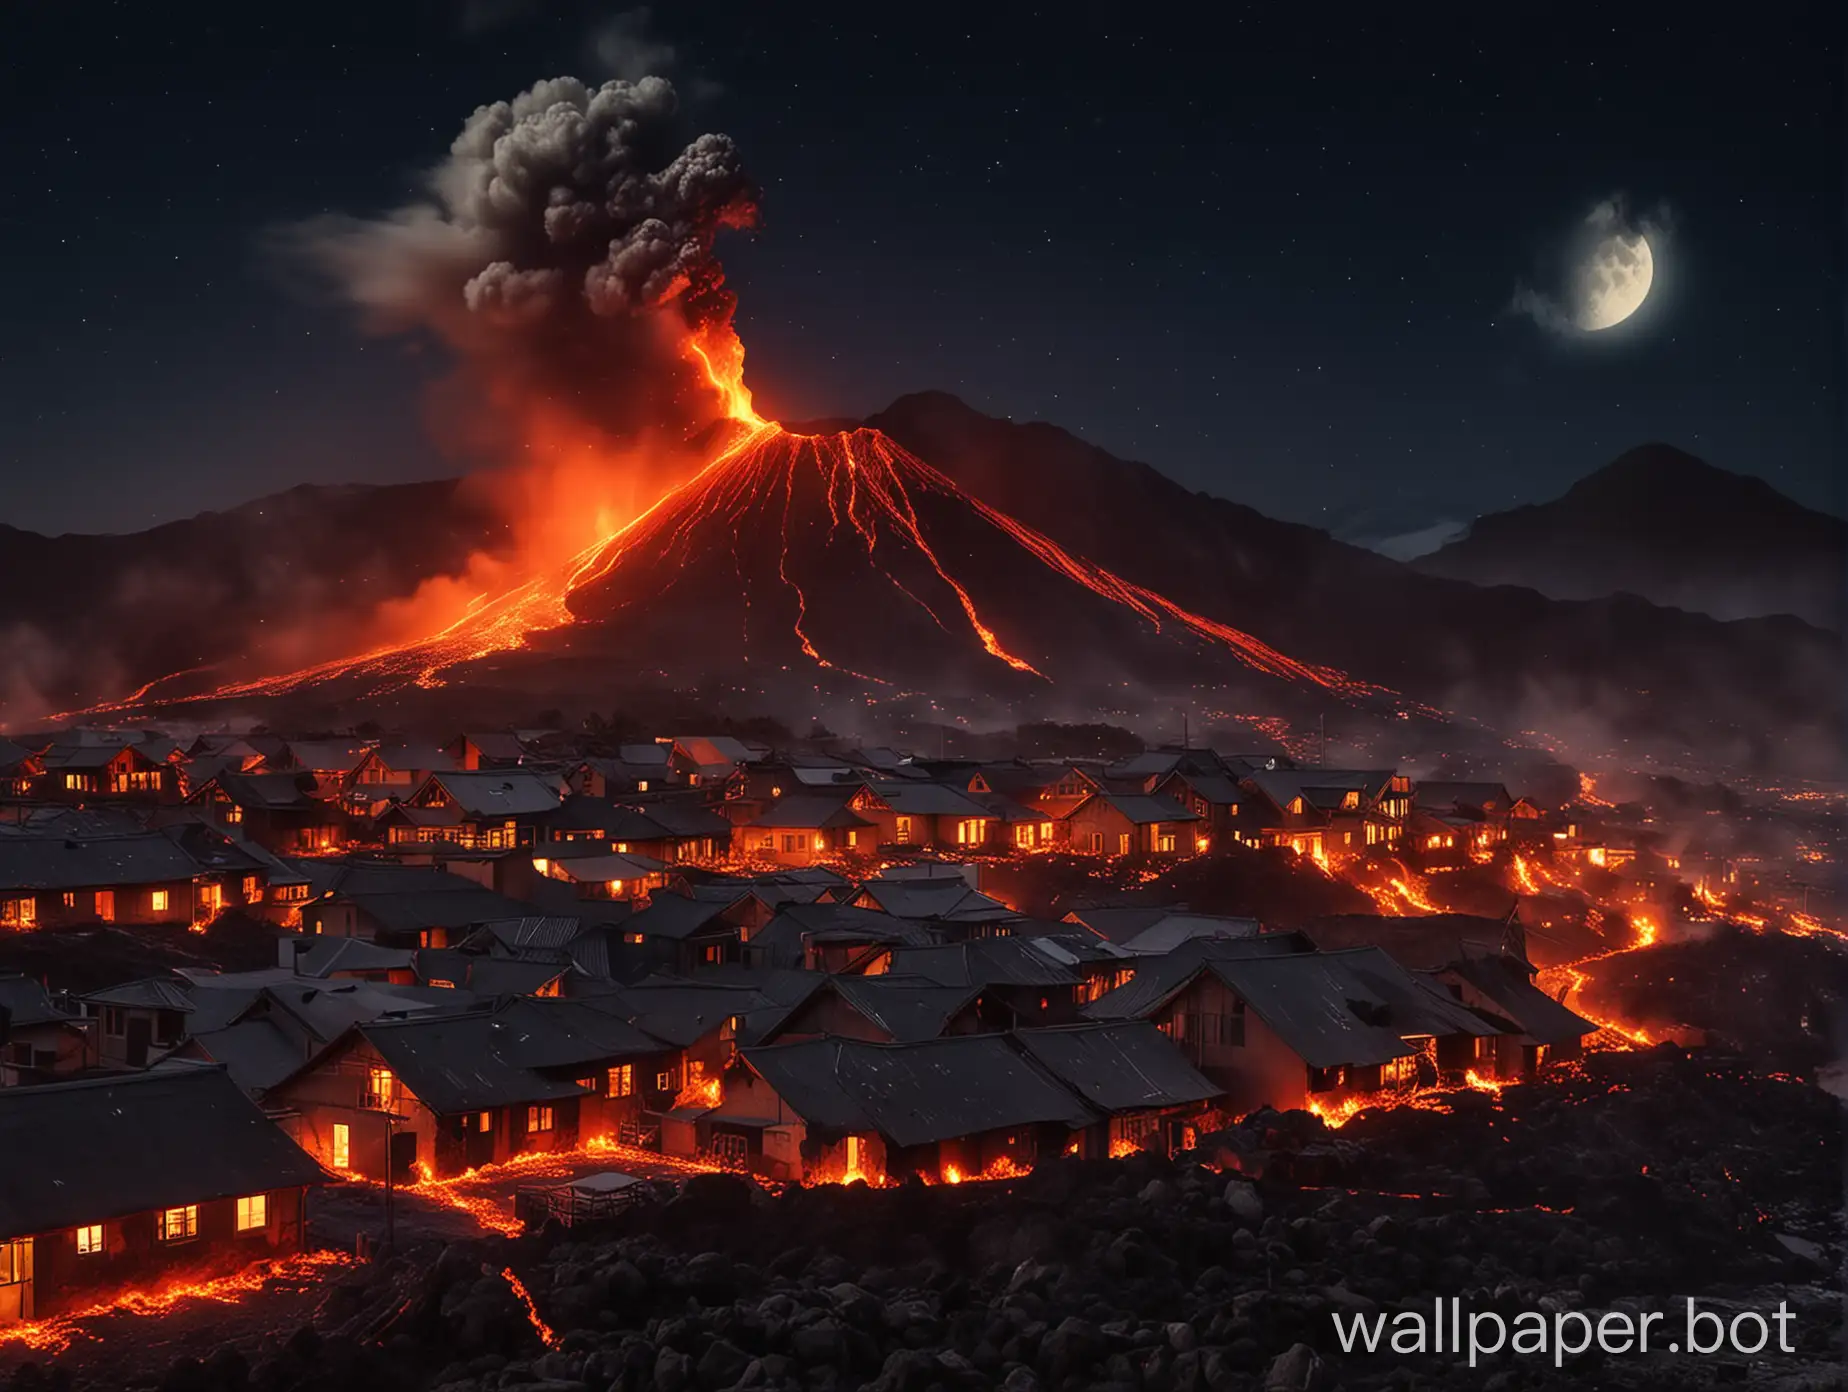 Volcano-Eruption-Hot-Lava-Flows-on-Village-Houses-at-Night